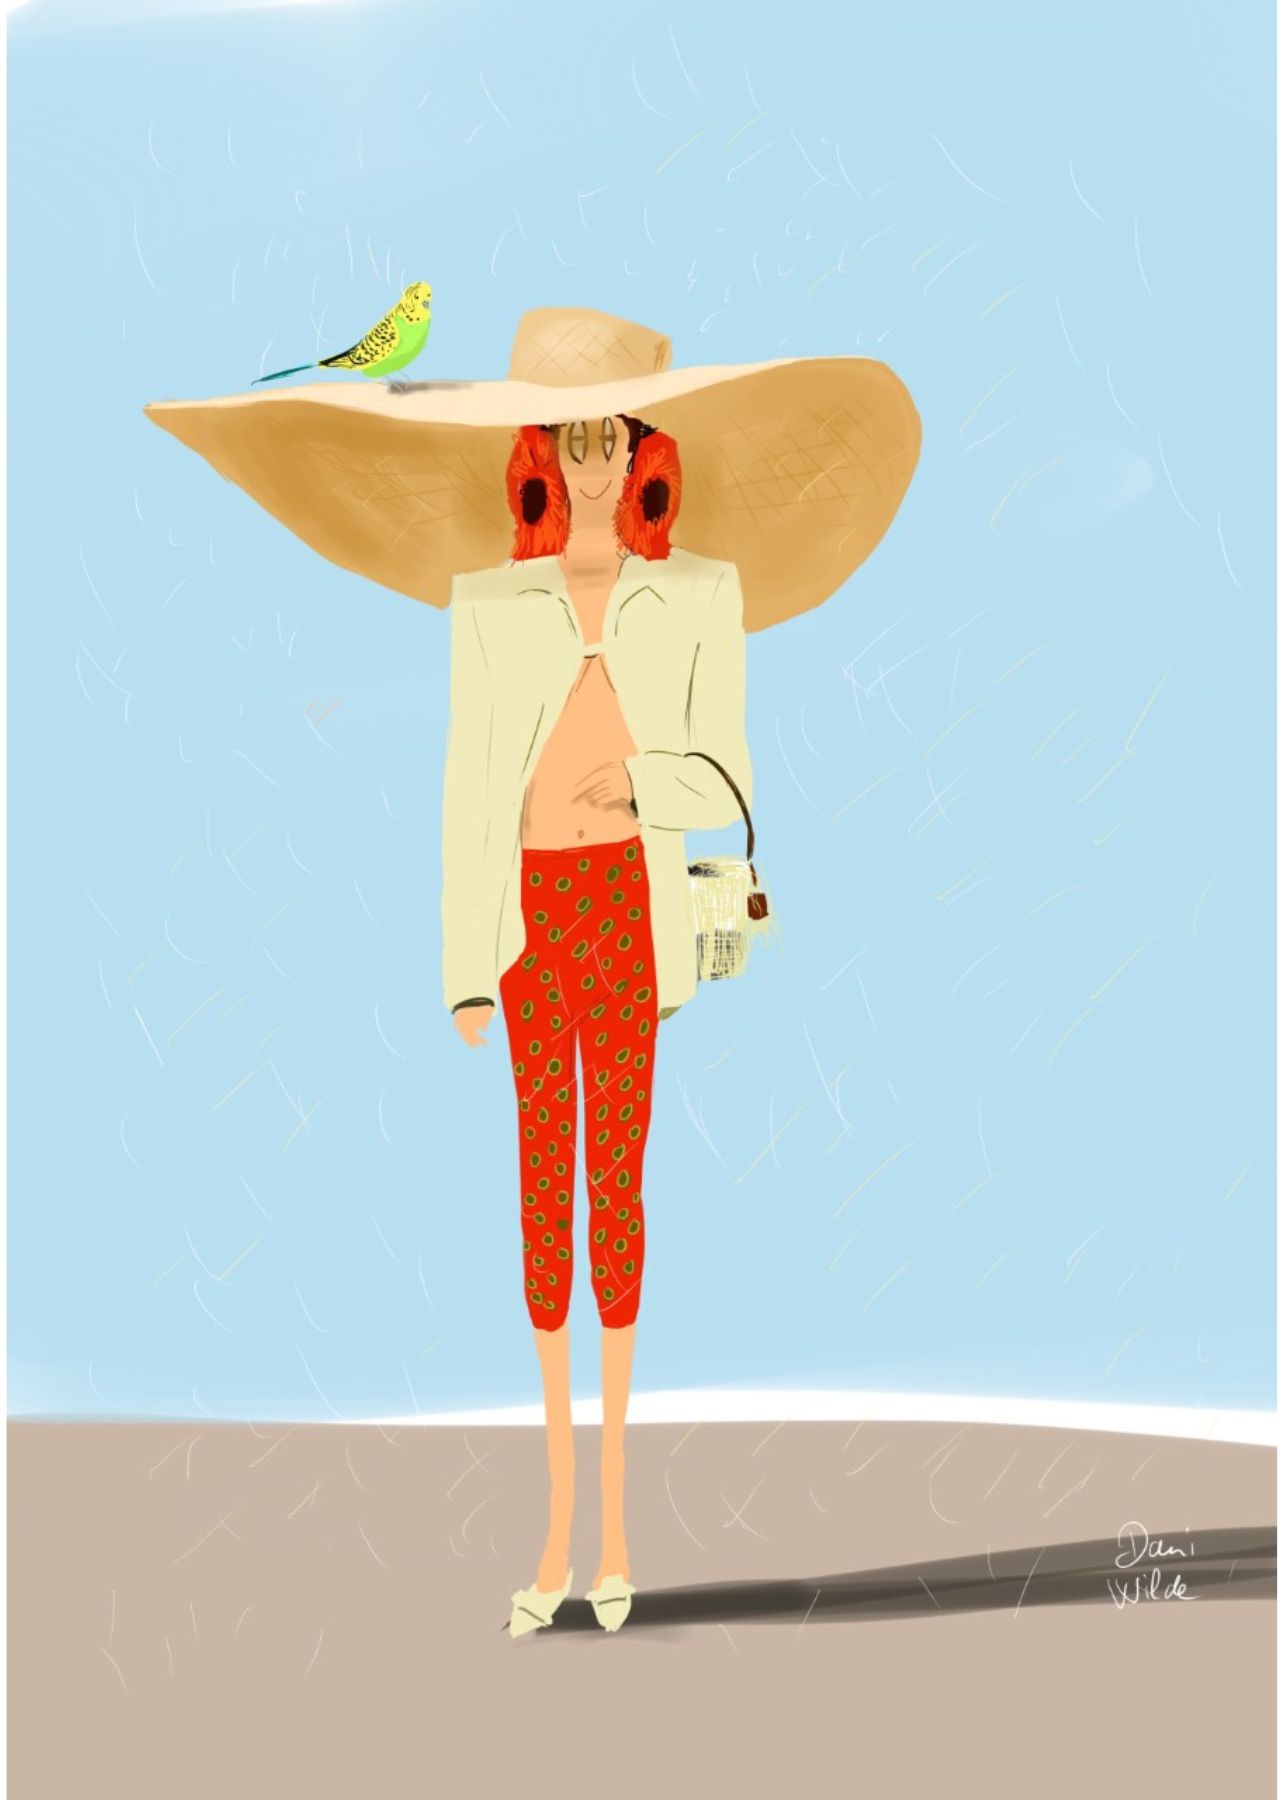 Dani Wilde Illustration of a woman wearing a large beach hat with a bird perched on the brim, red polka dot pants, and statement earrings